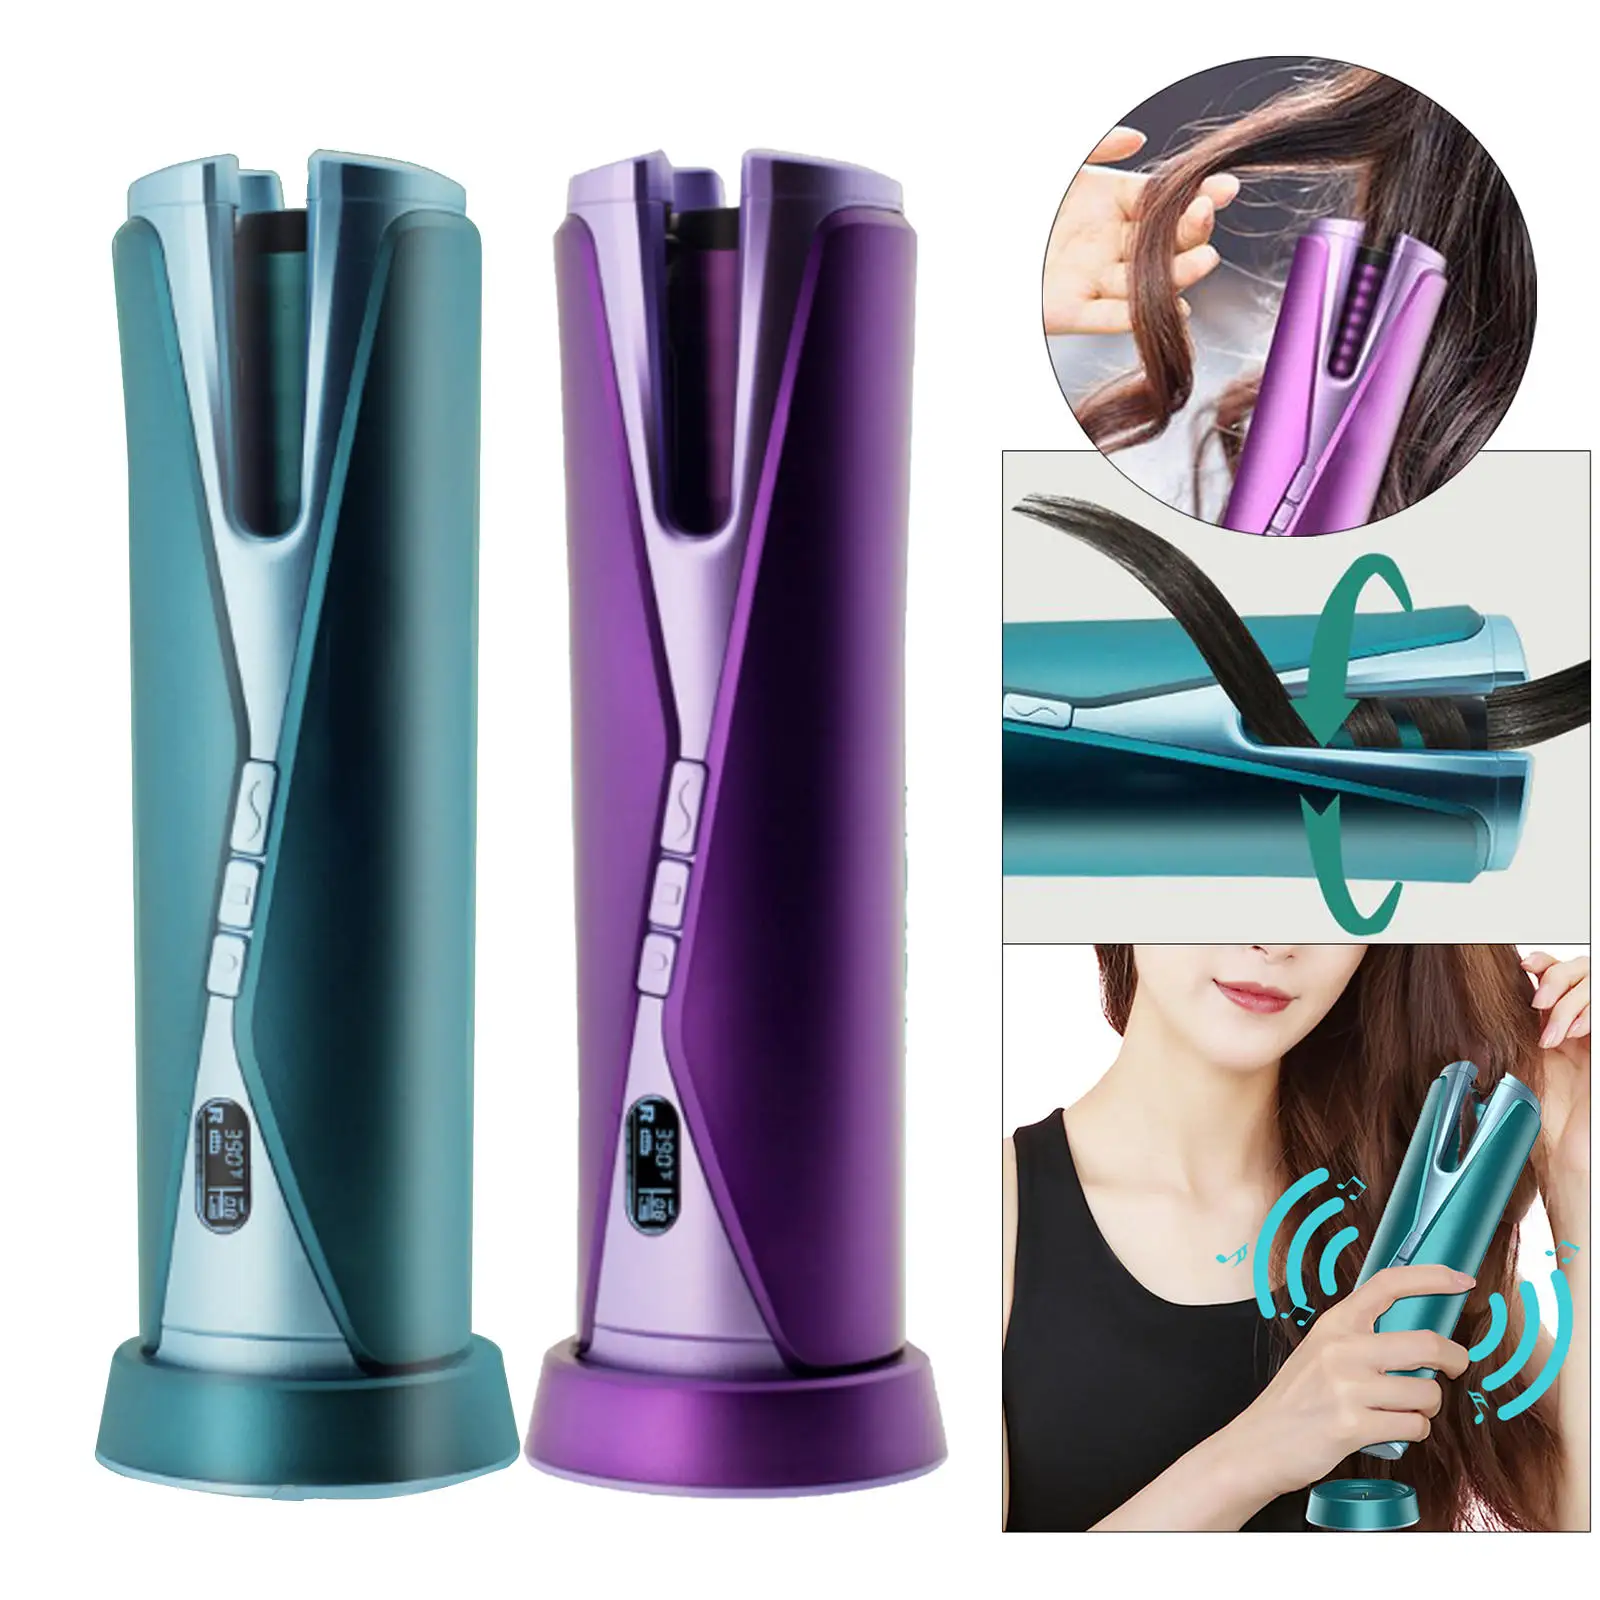 Portable Auto Hair Rollers Curler with LCD Display Cordless Music Curling Tongs Curling Iron for Hair Styling Travel, Home